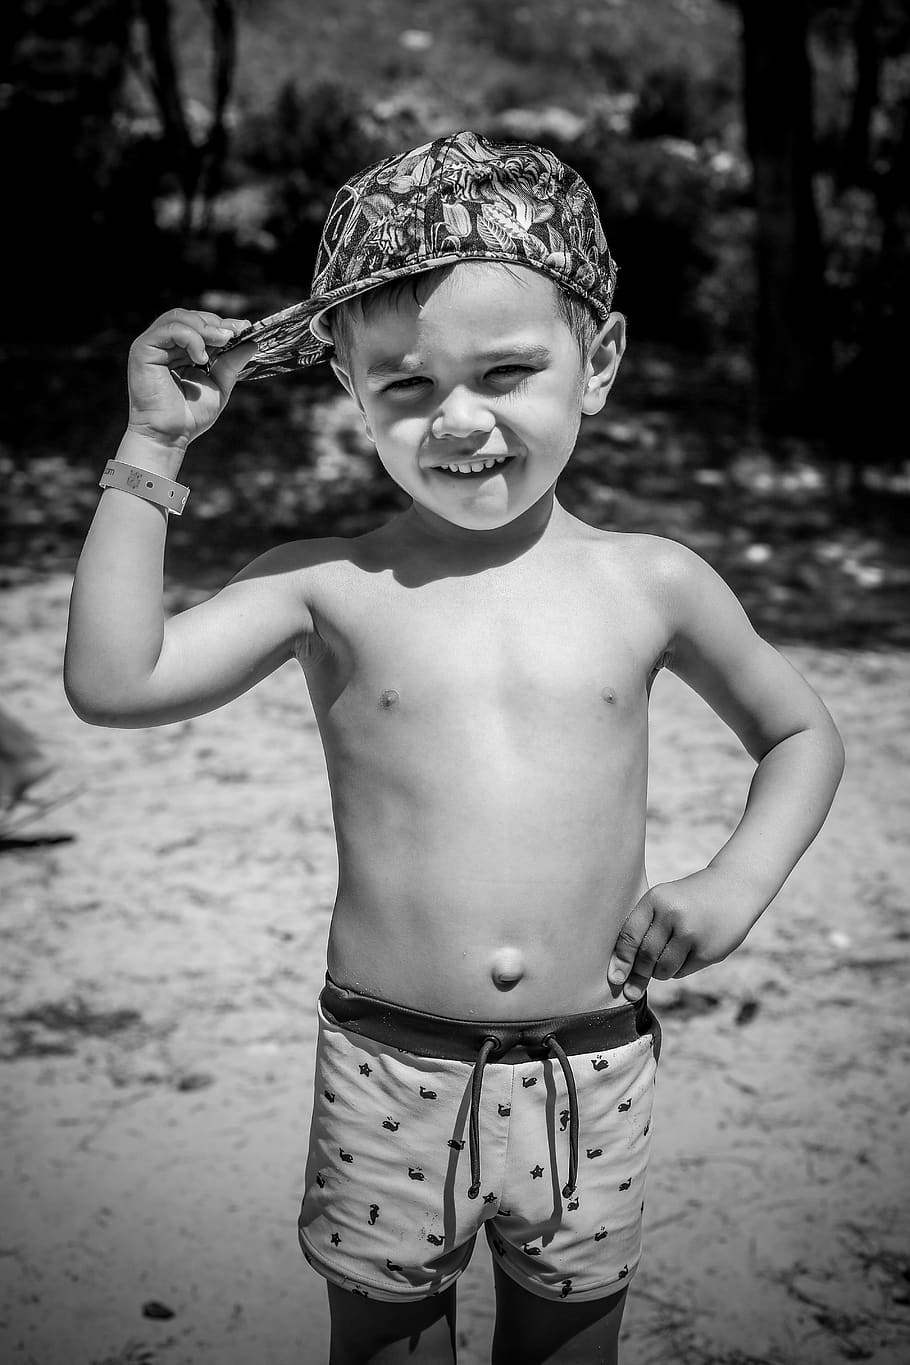 monochrome, calabarca, boy, joy, child, happiness, young, person, summer, water